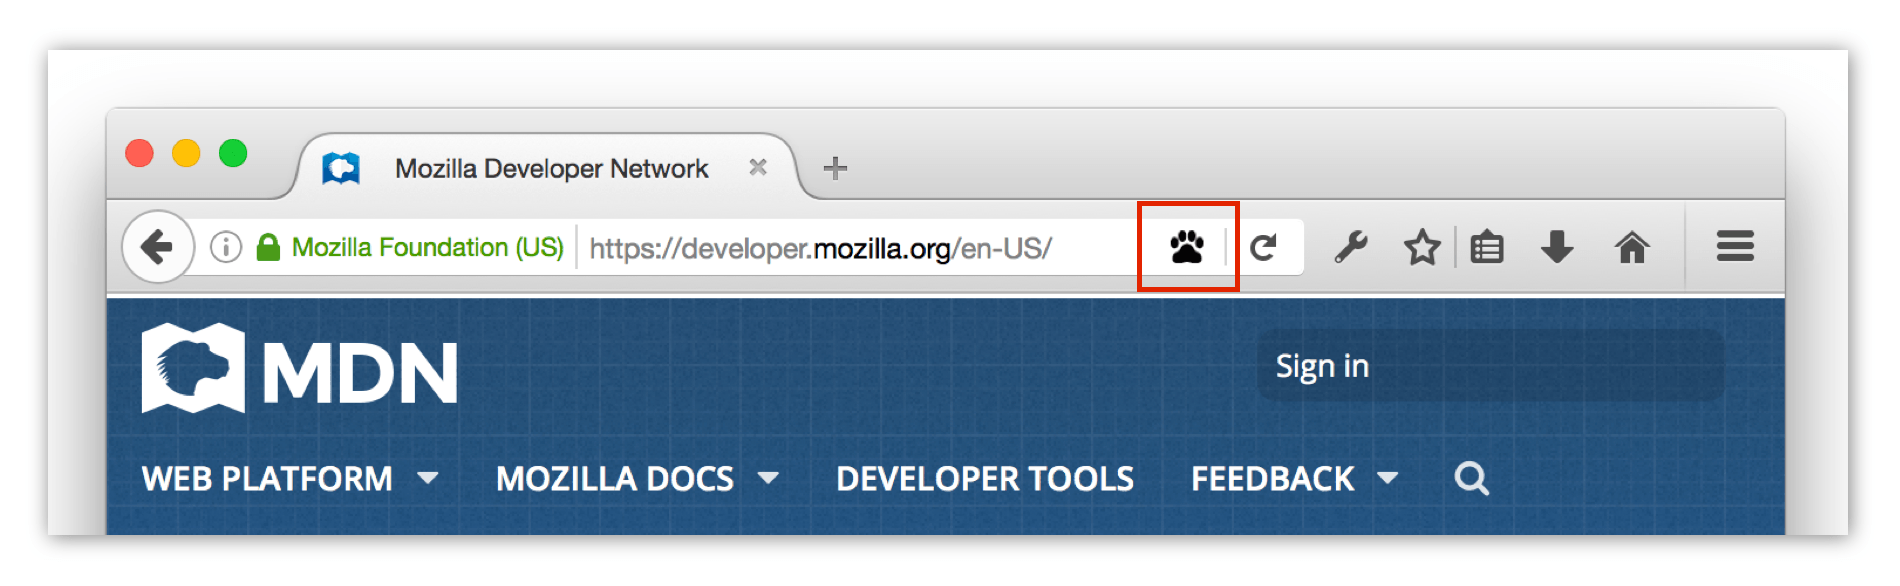 Paw print icon representing a page action